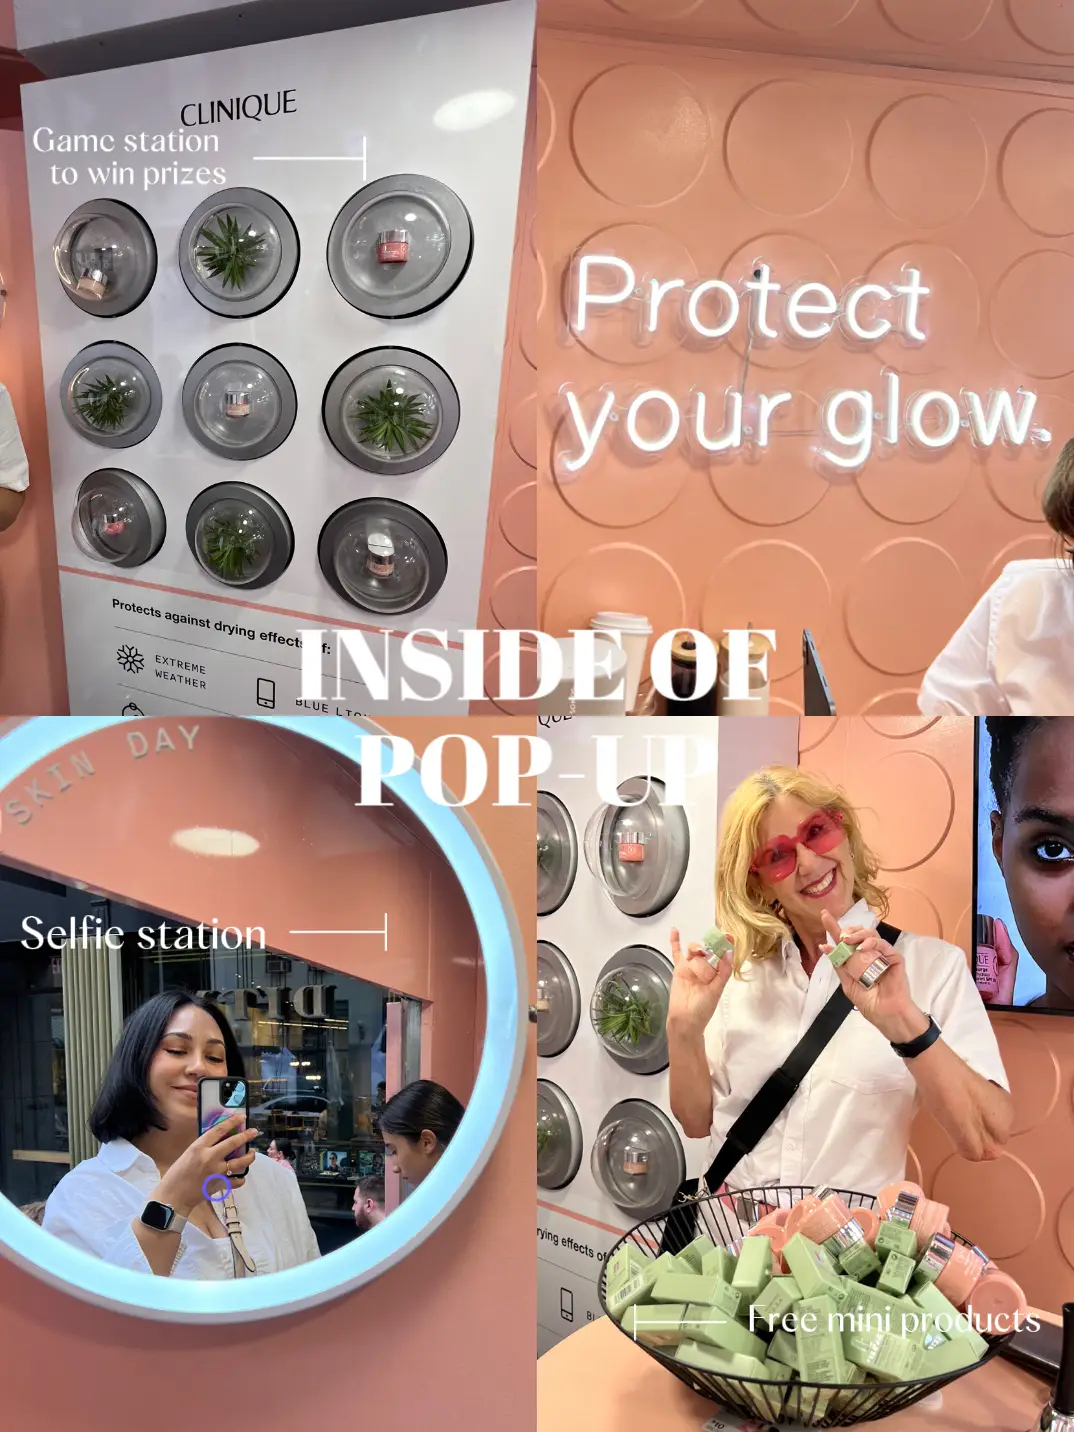 fresh Rose Hydration Station Pop-Up — NYC for FREE